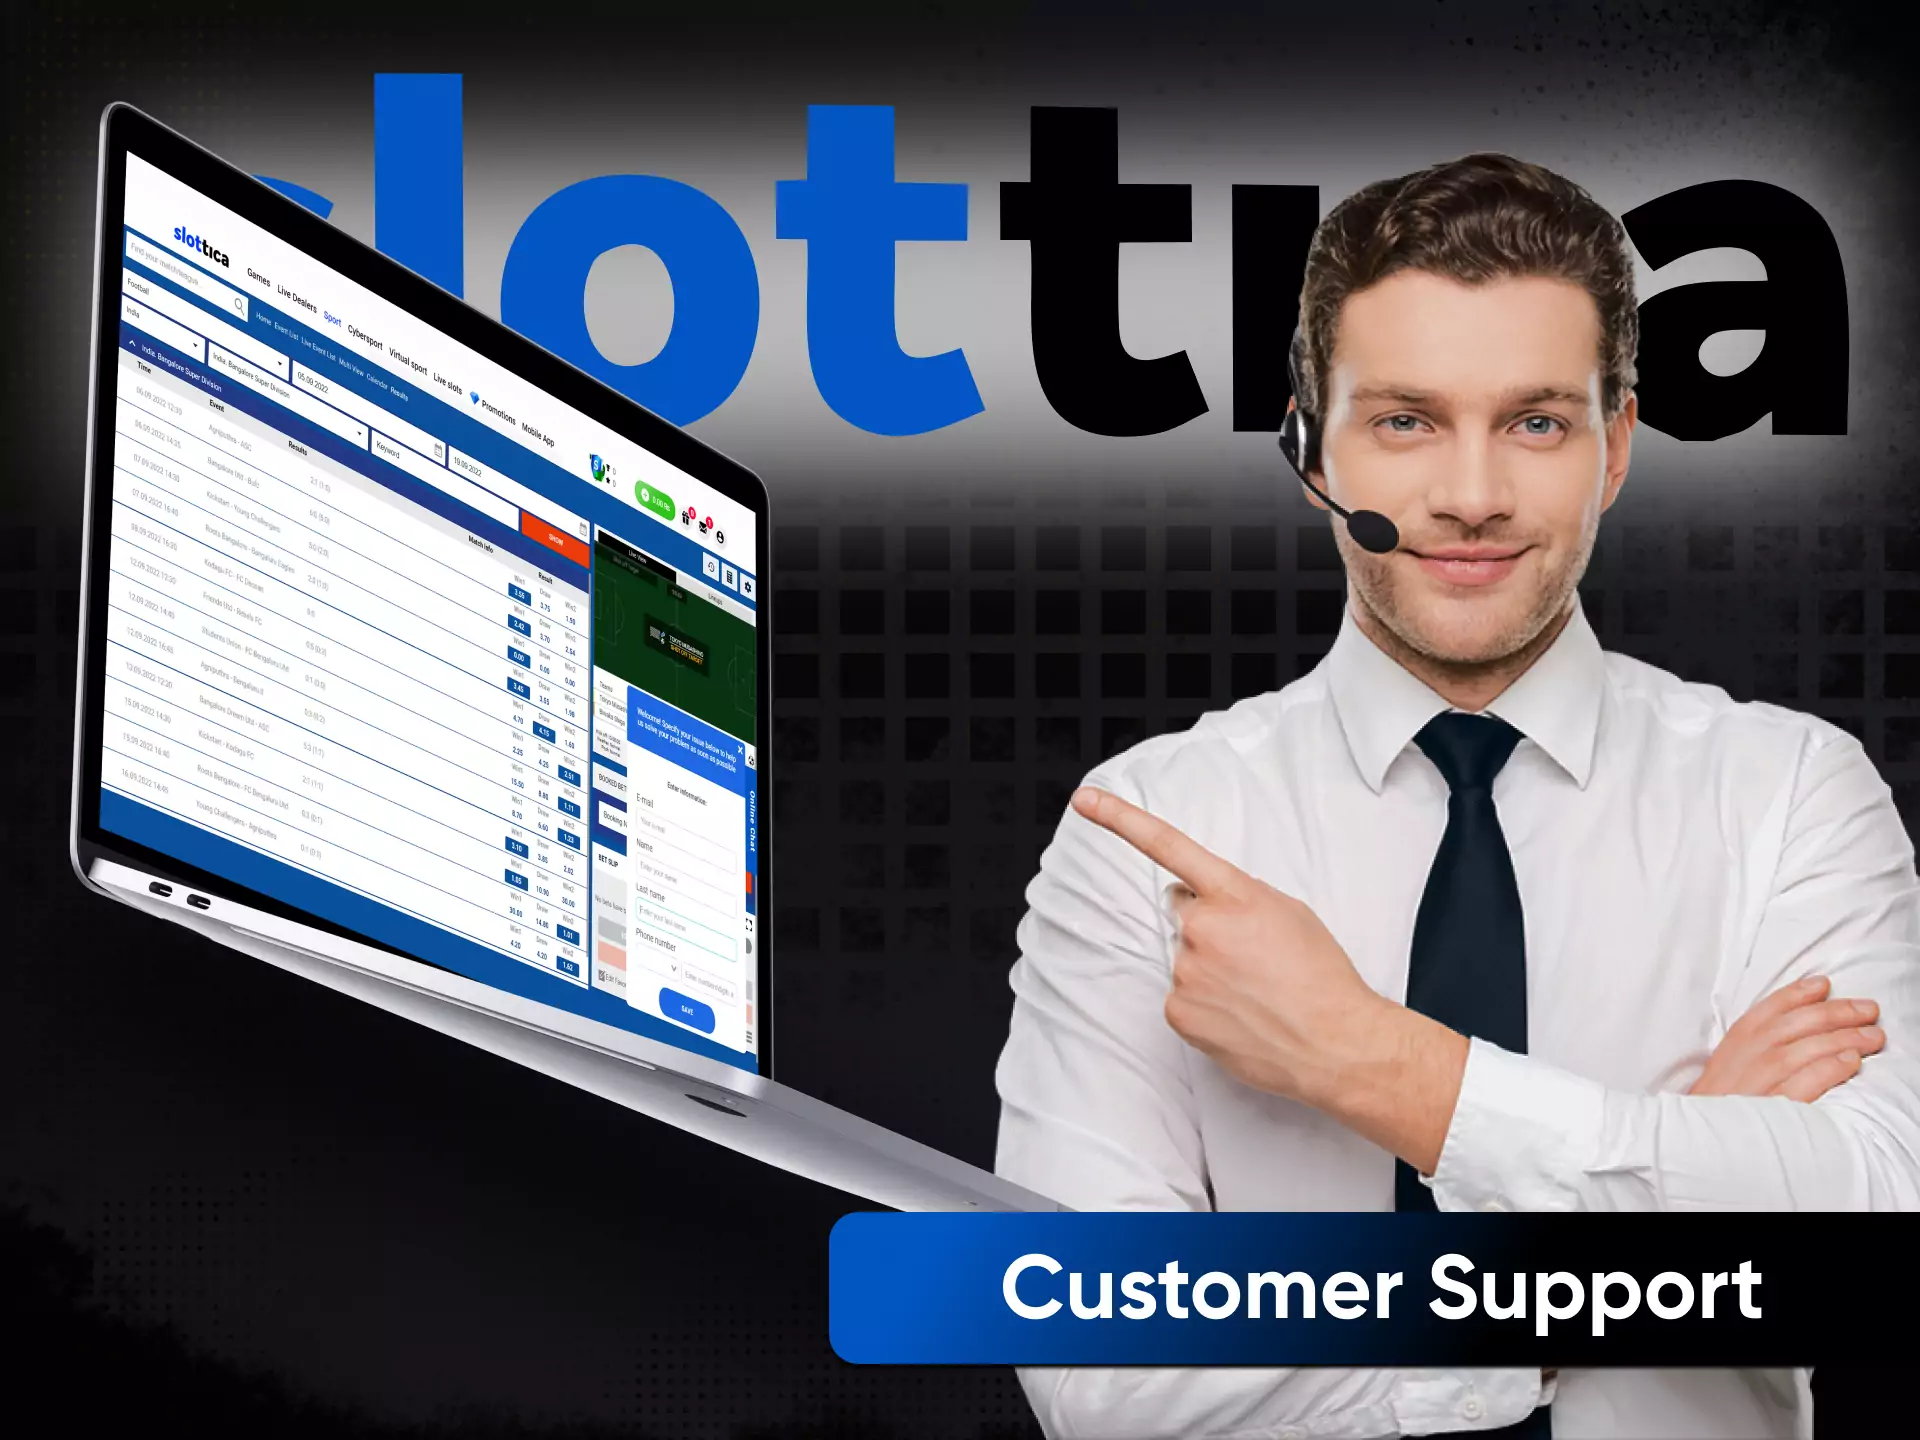 If you have questions, don't hesitate to ask Slottica customer support.